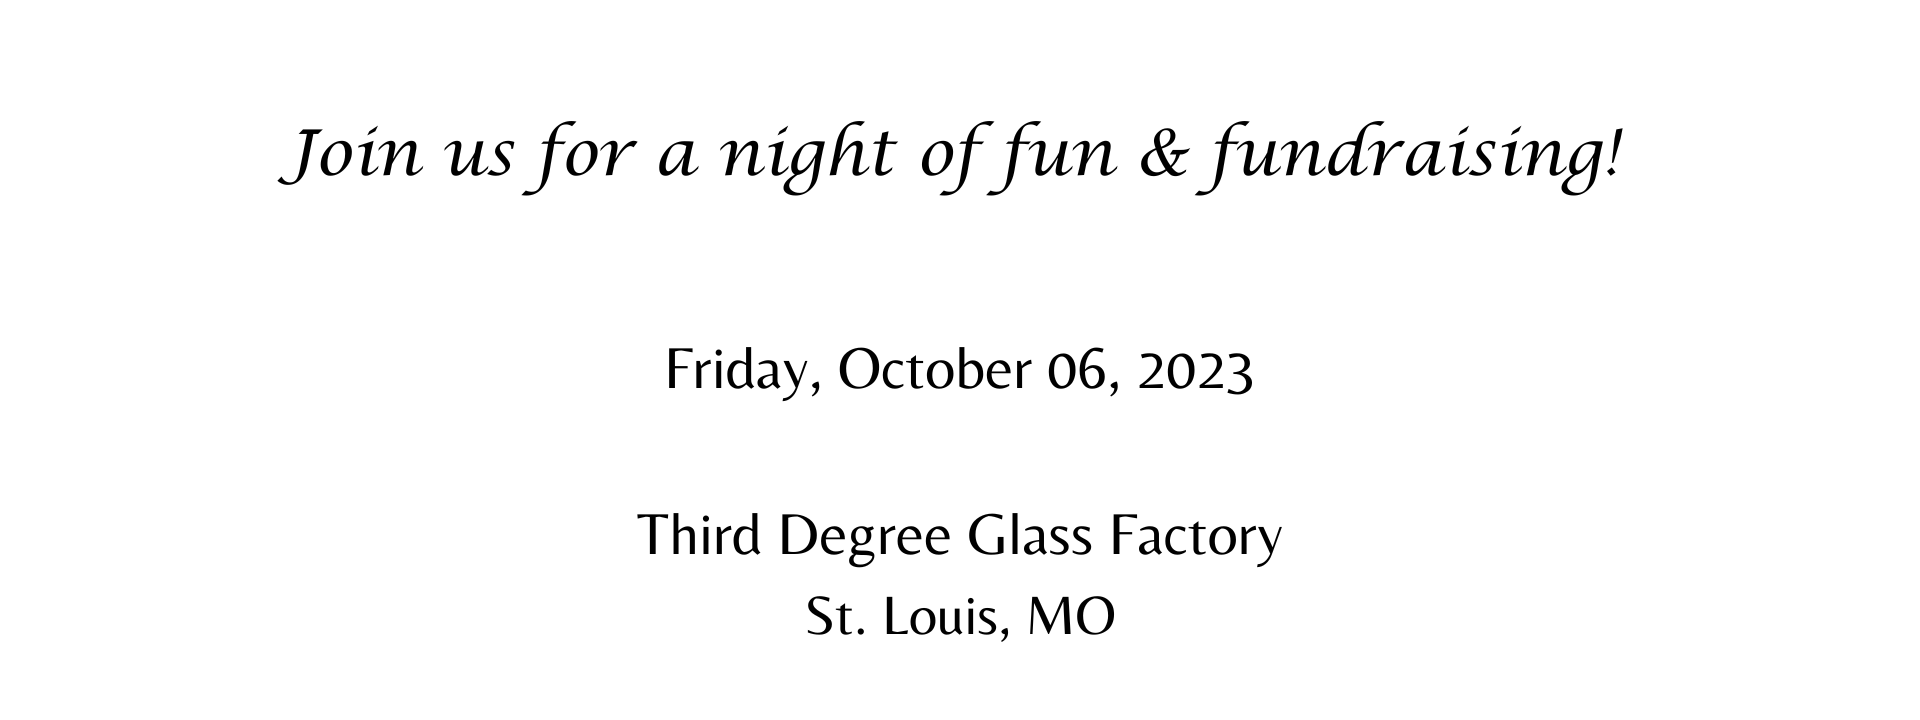 Join us for a night of fun & fundraising! (1920 × 920 px) (1920 × 720 px).png